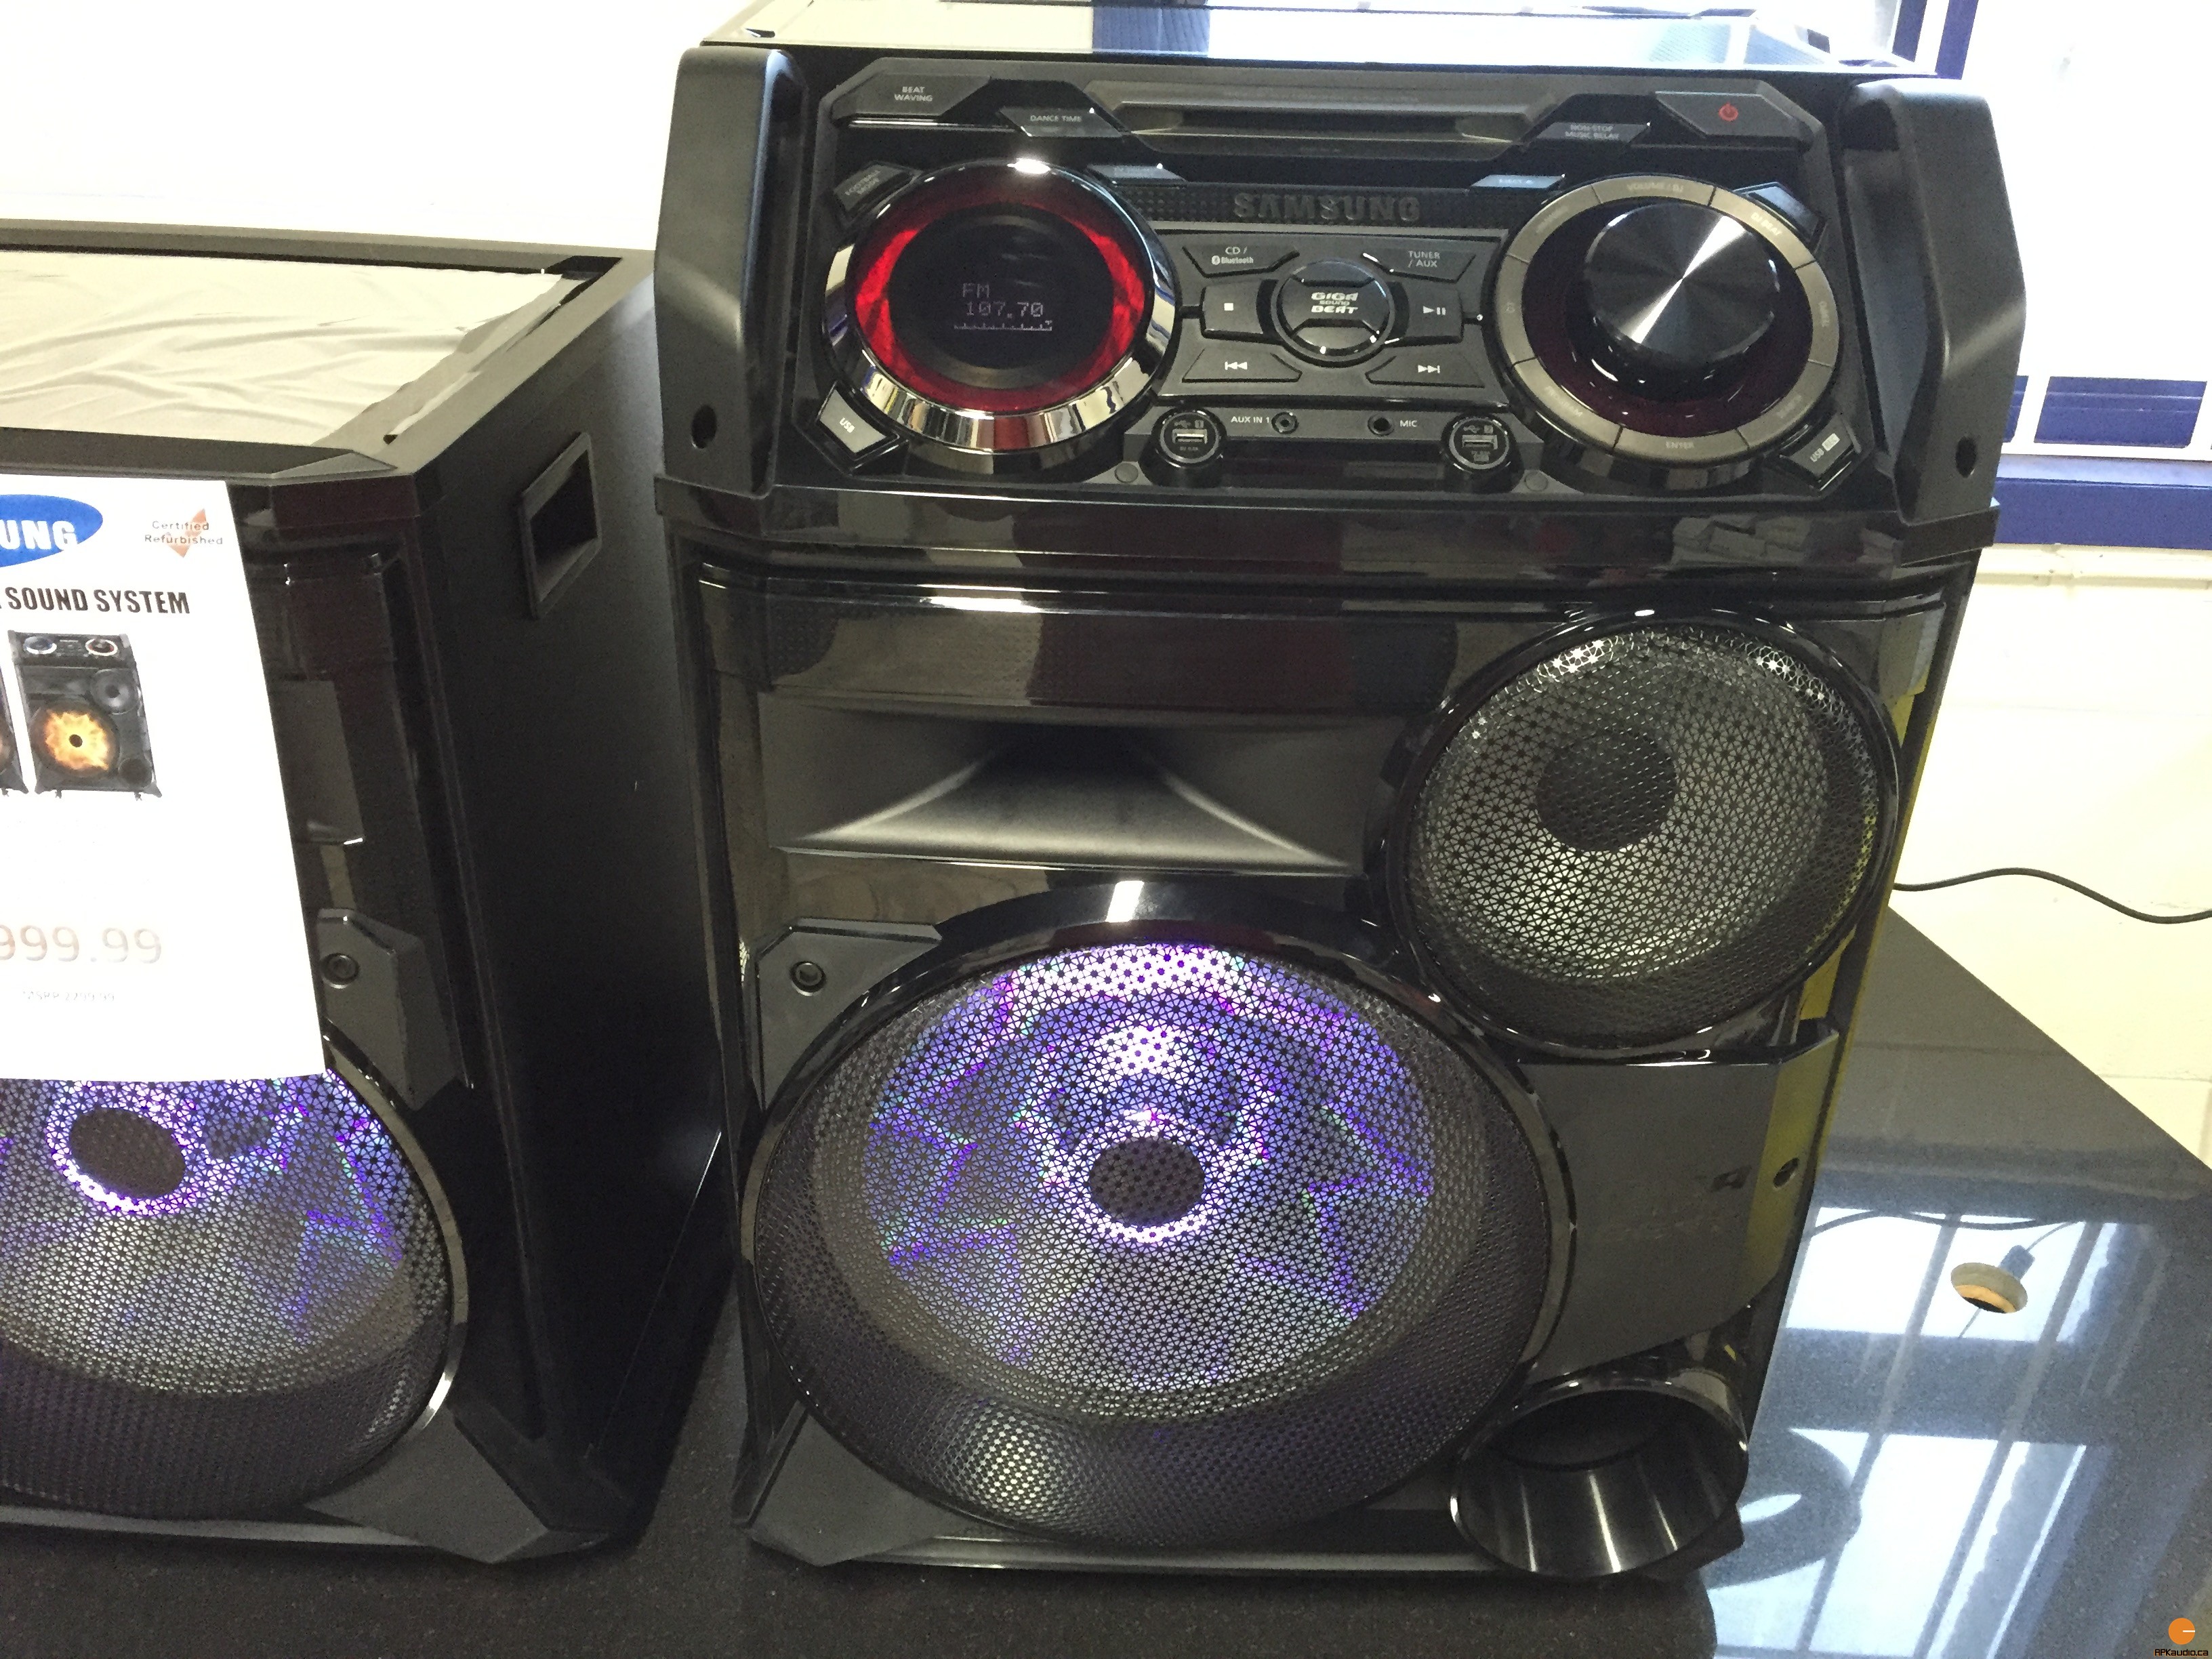 Samsung: Possibly the worst stereo system I’ve ever seen 